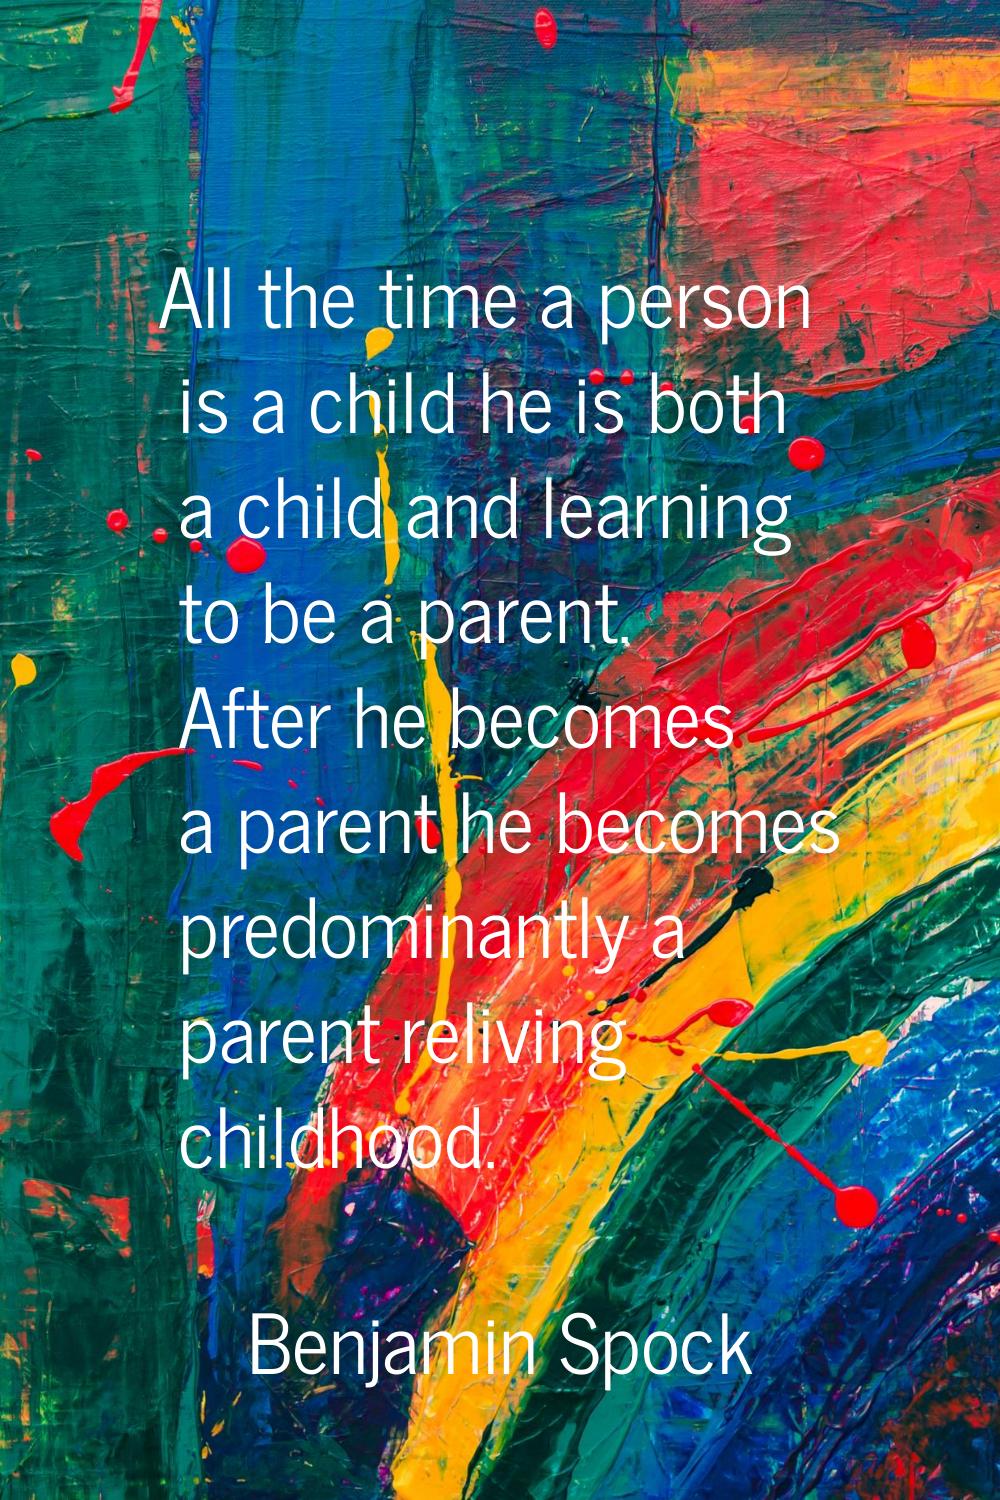 All the time a person is a child he is both a child and learning to be a parent. After he becomes a